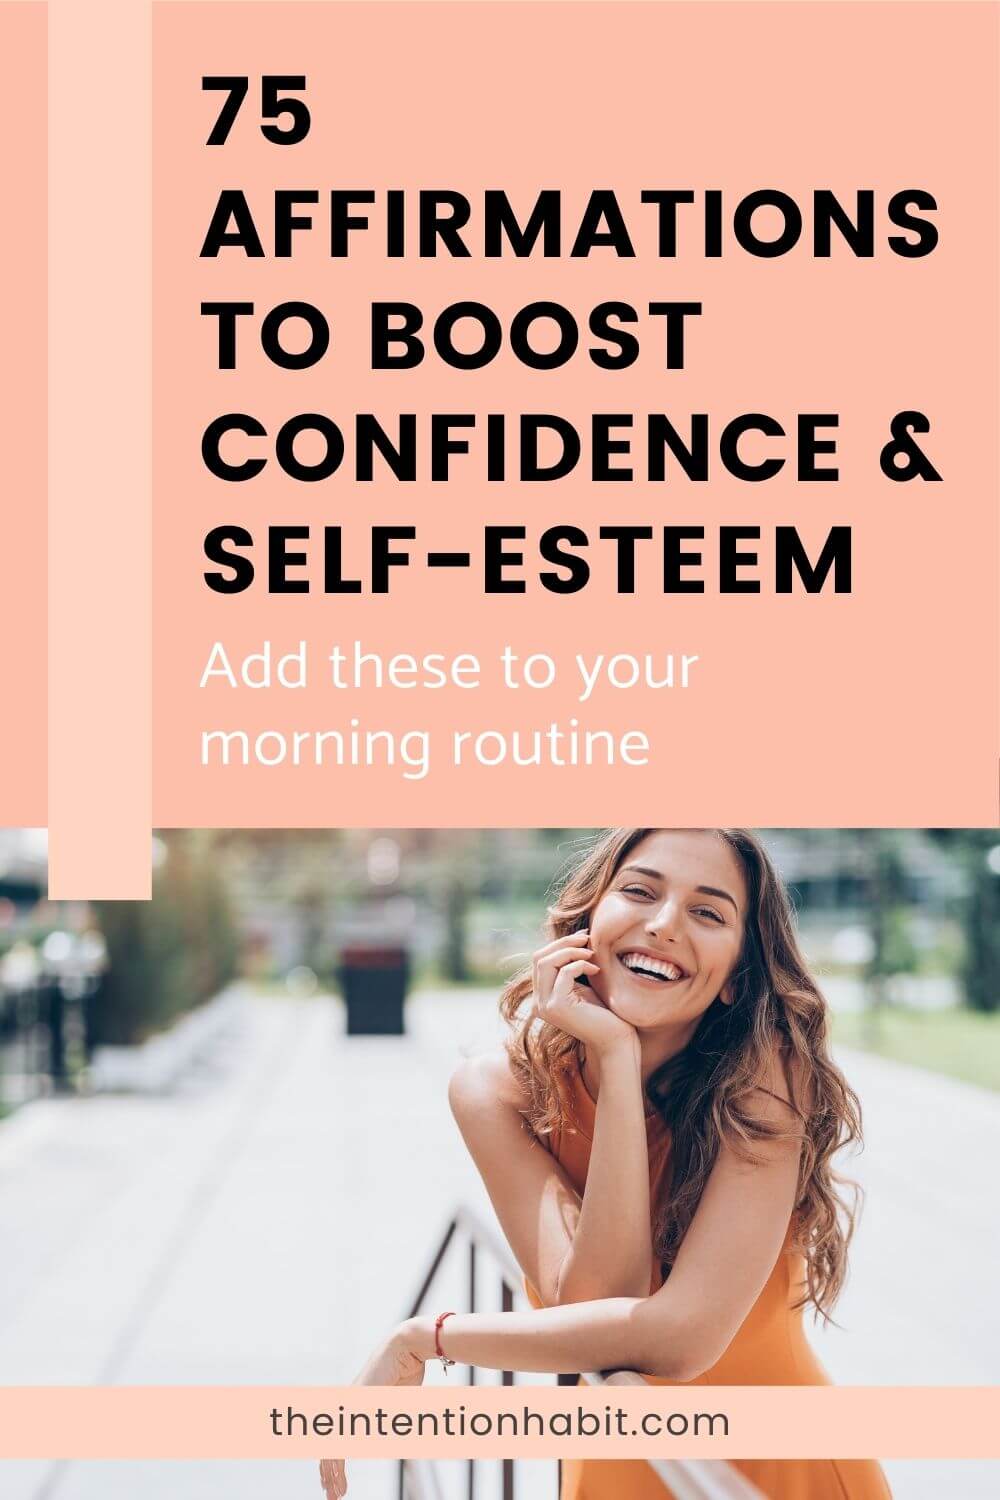 75 affirmations to boost confidence and self-esteem.